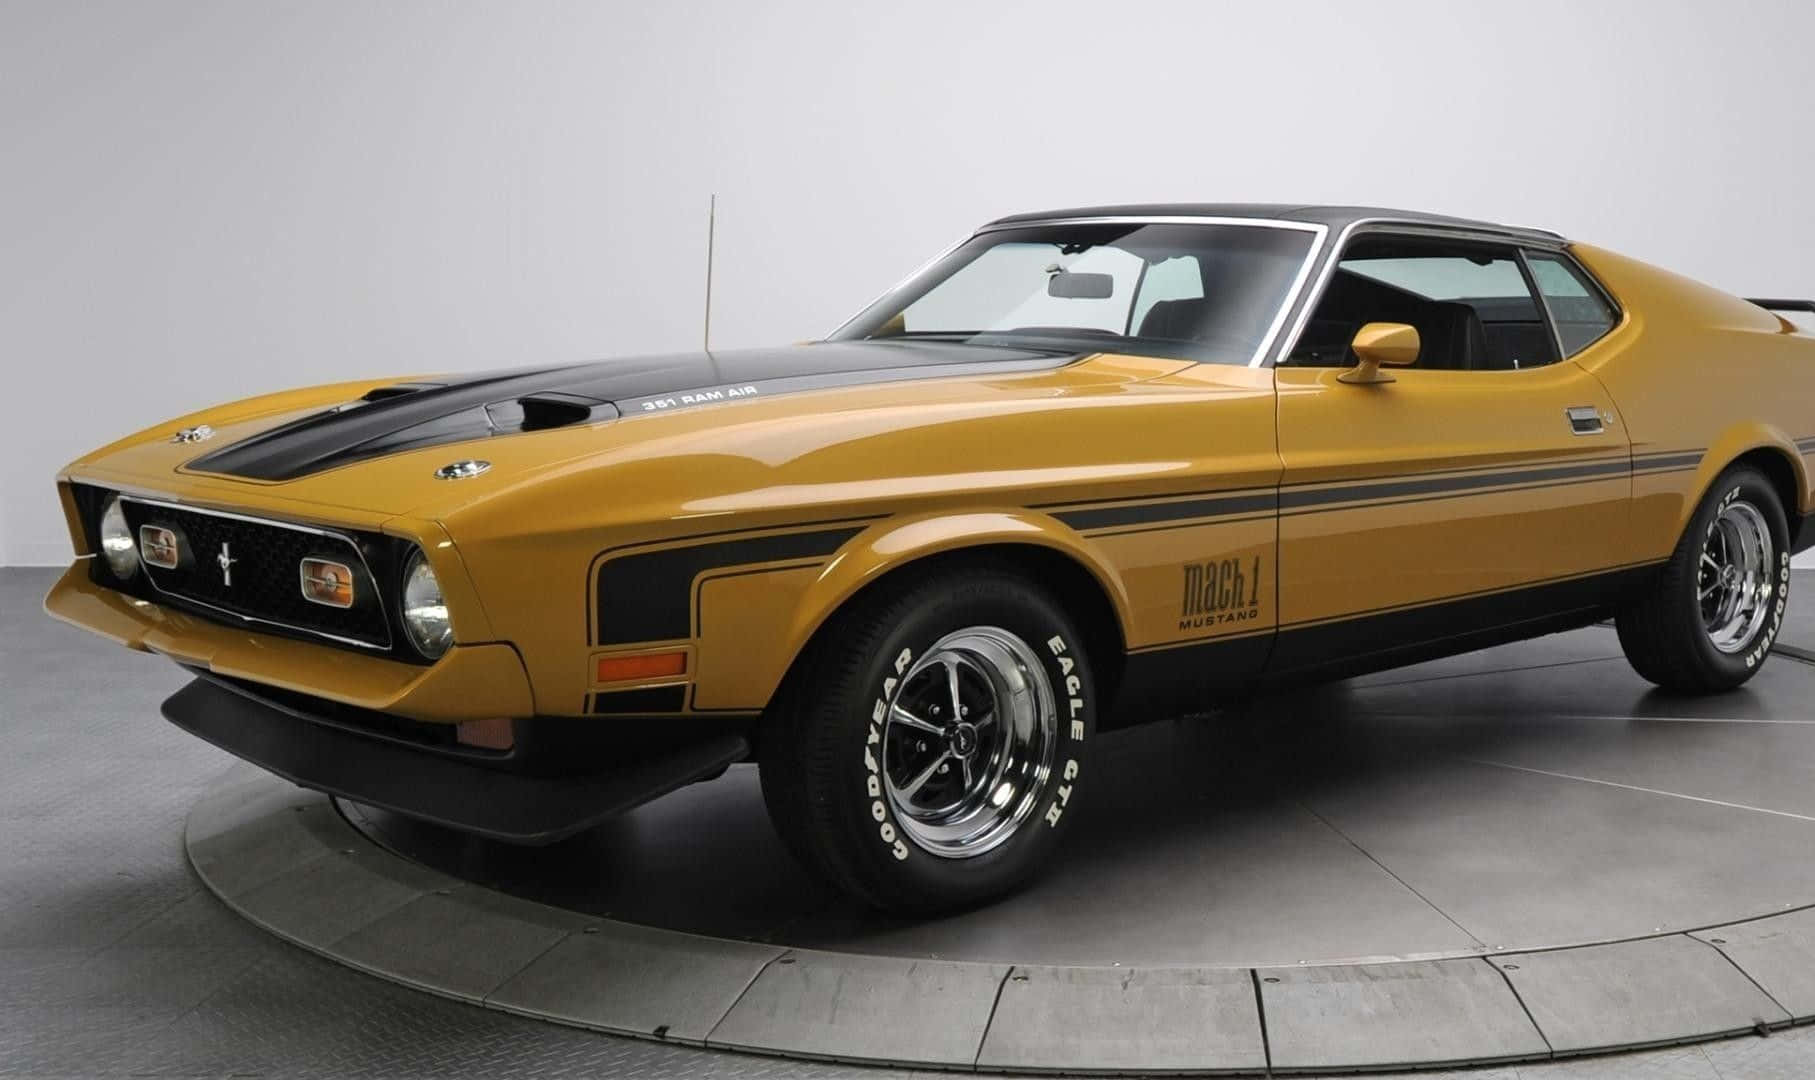 Stunning Ford Mustang Mach 1 in action Wallpaper